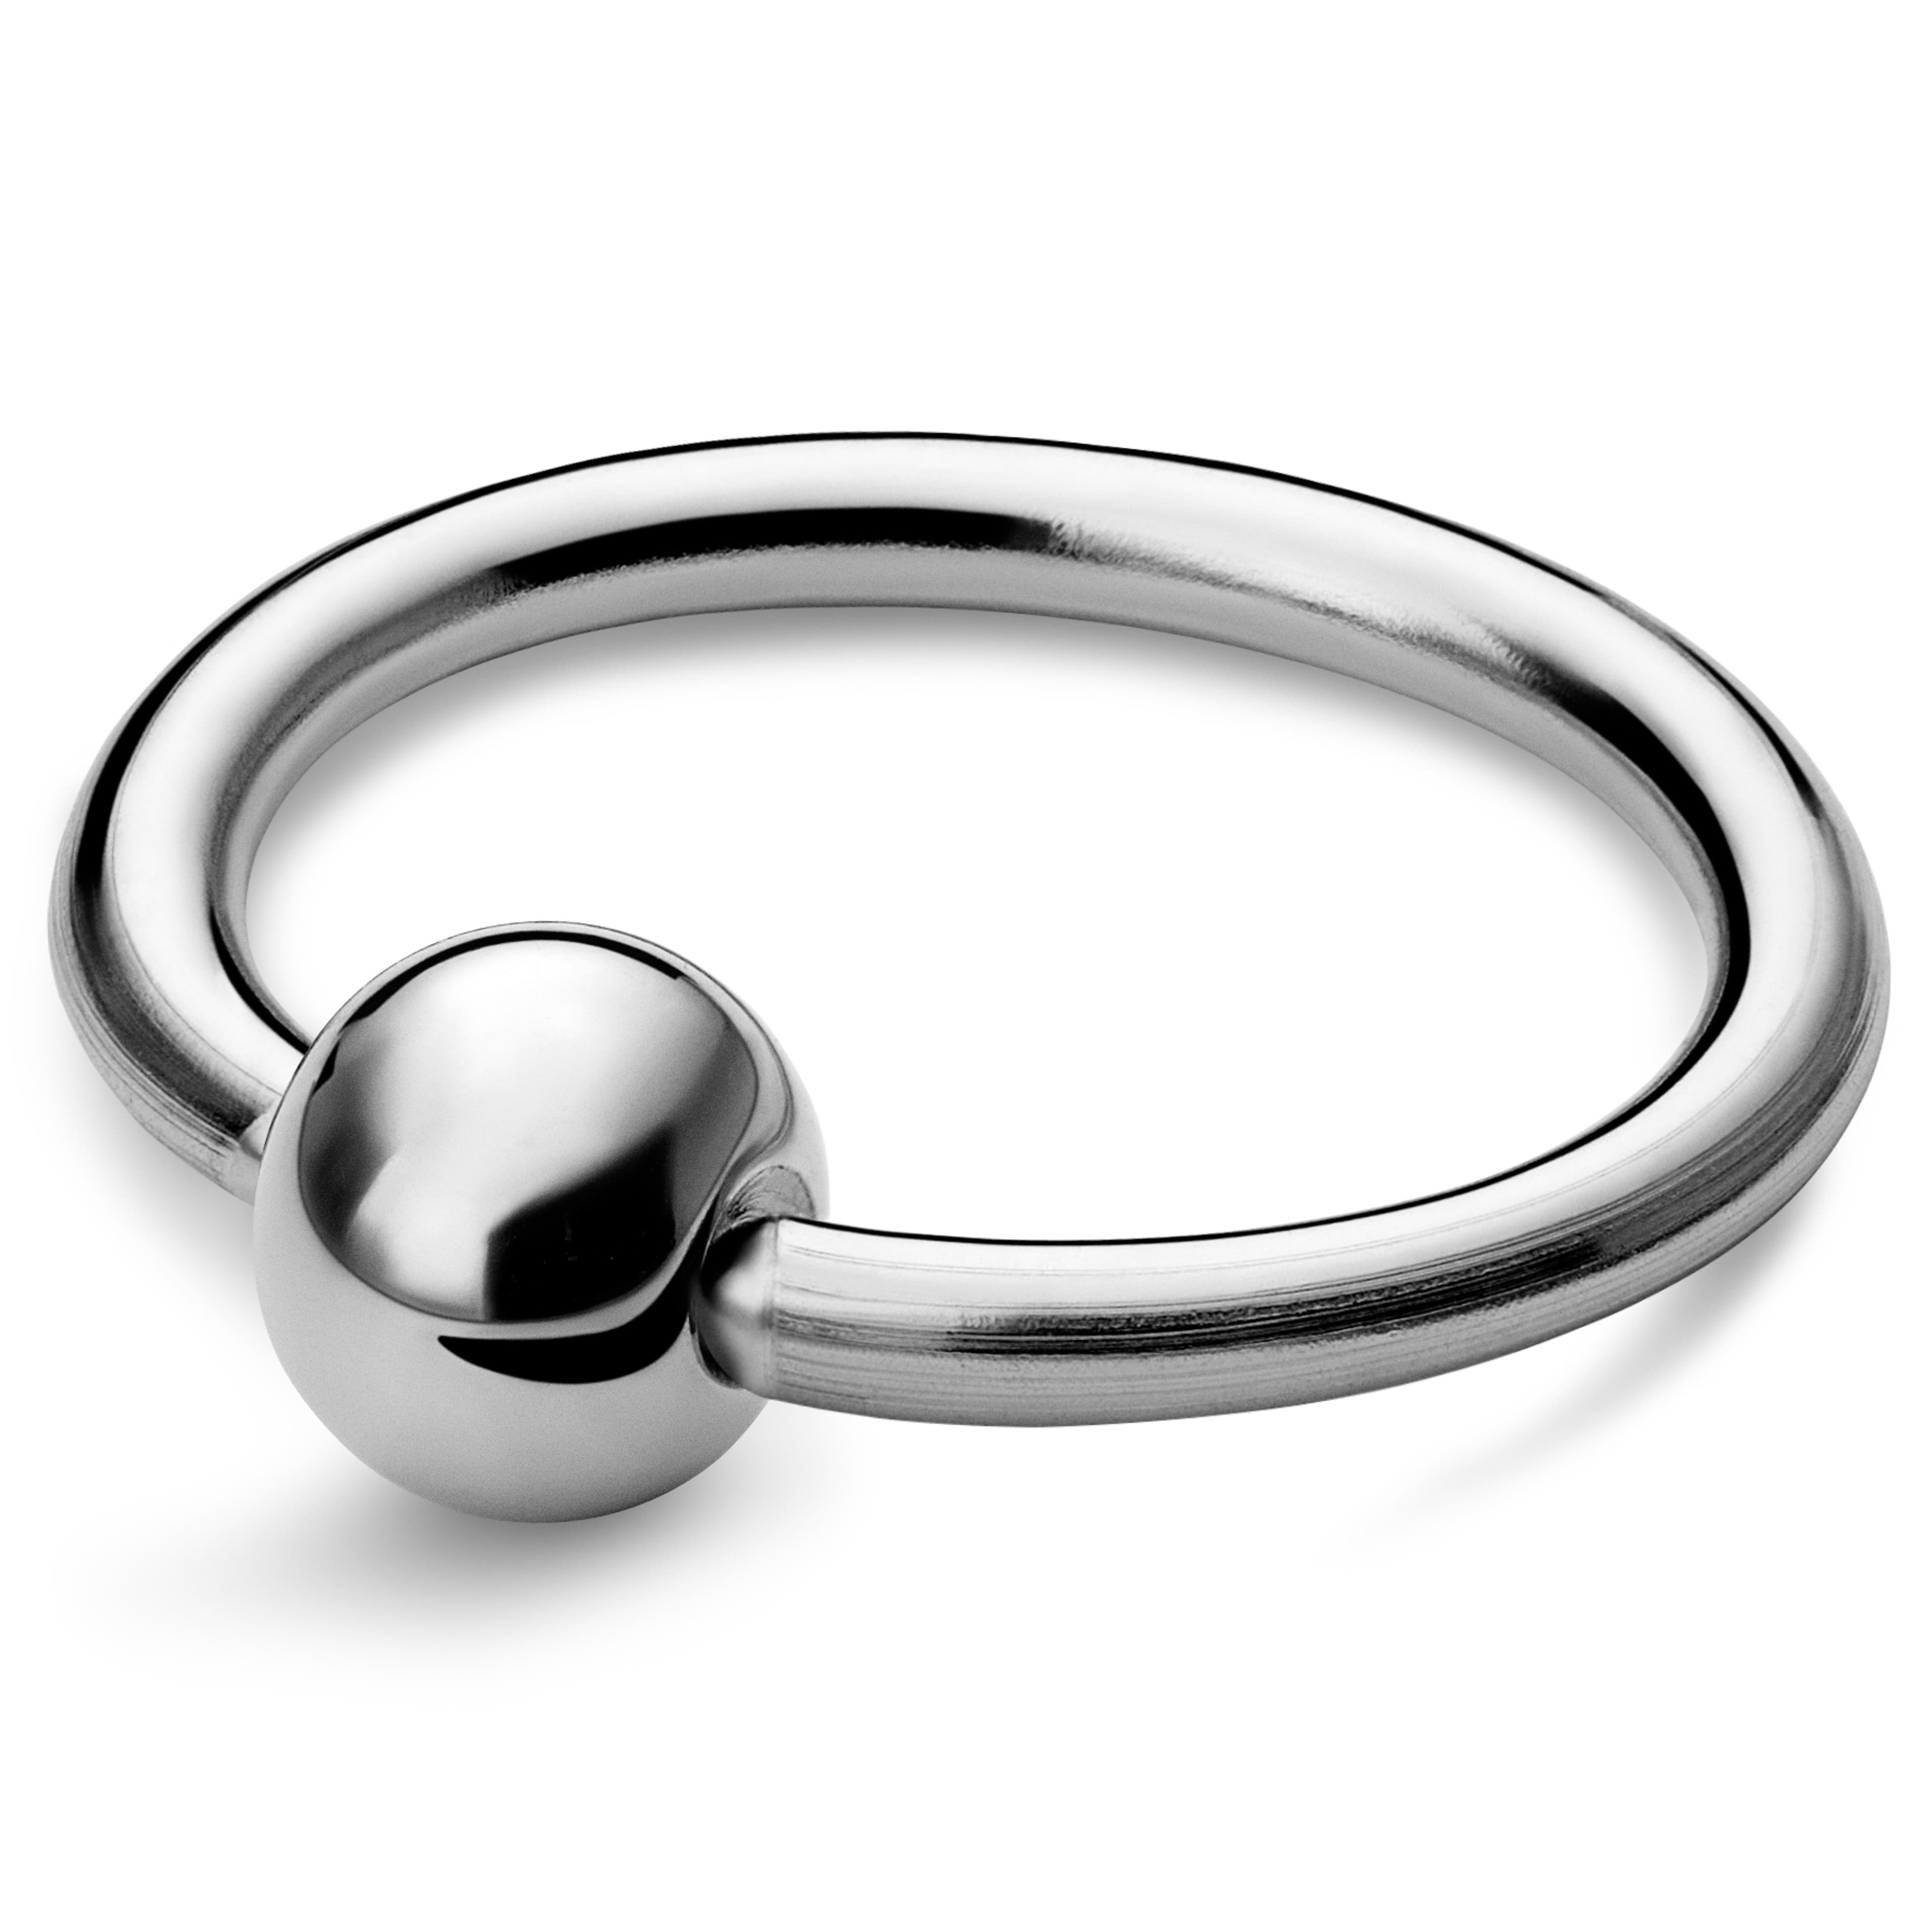 1/4" (6 mm) Silver-Tone Surgical Steel Captive Bead Ring